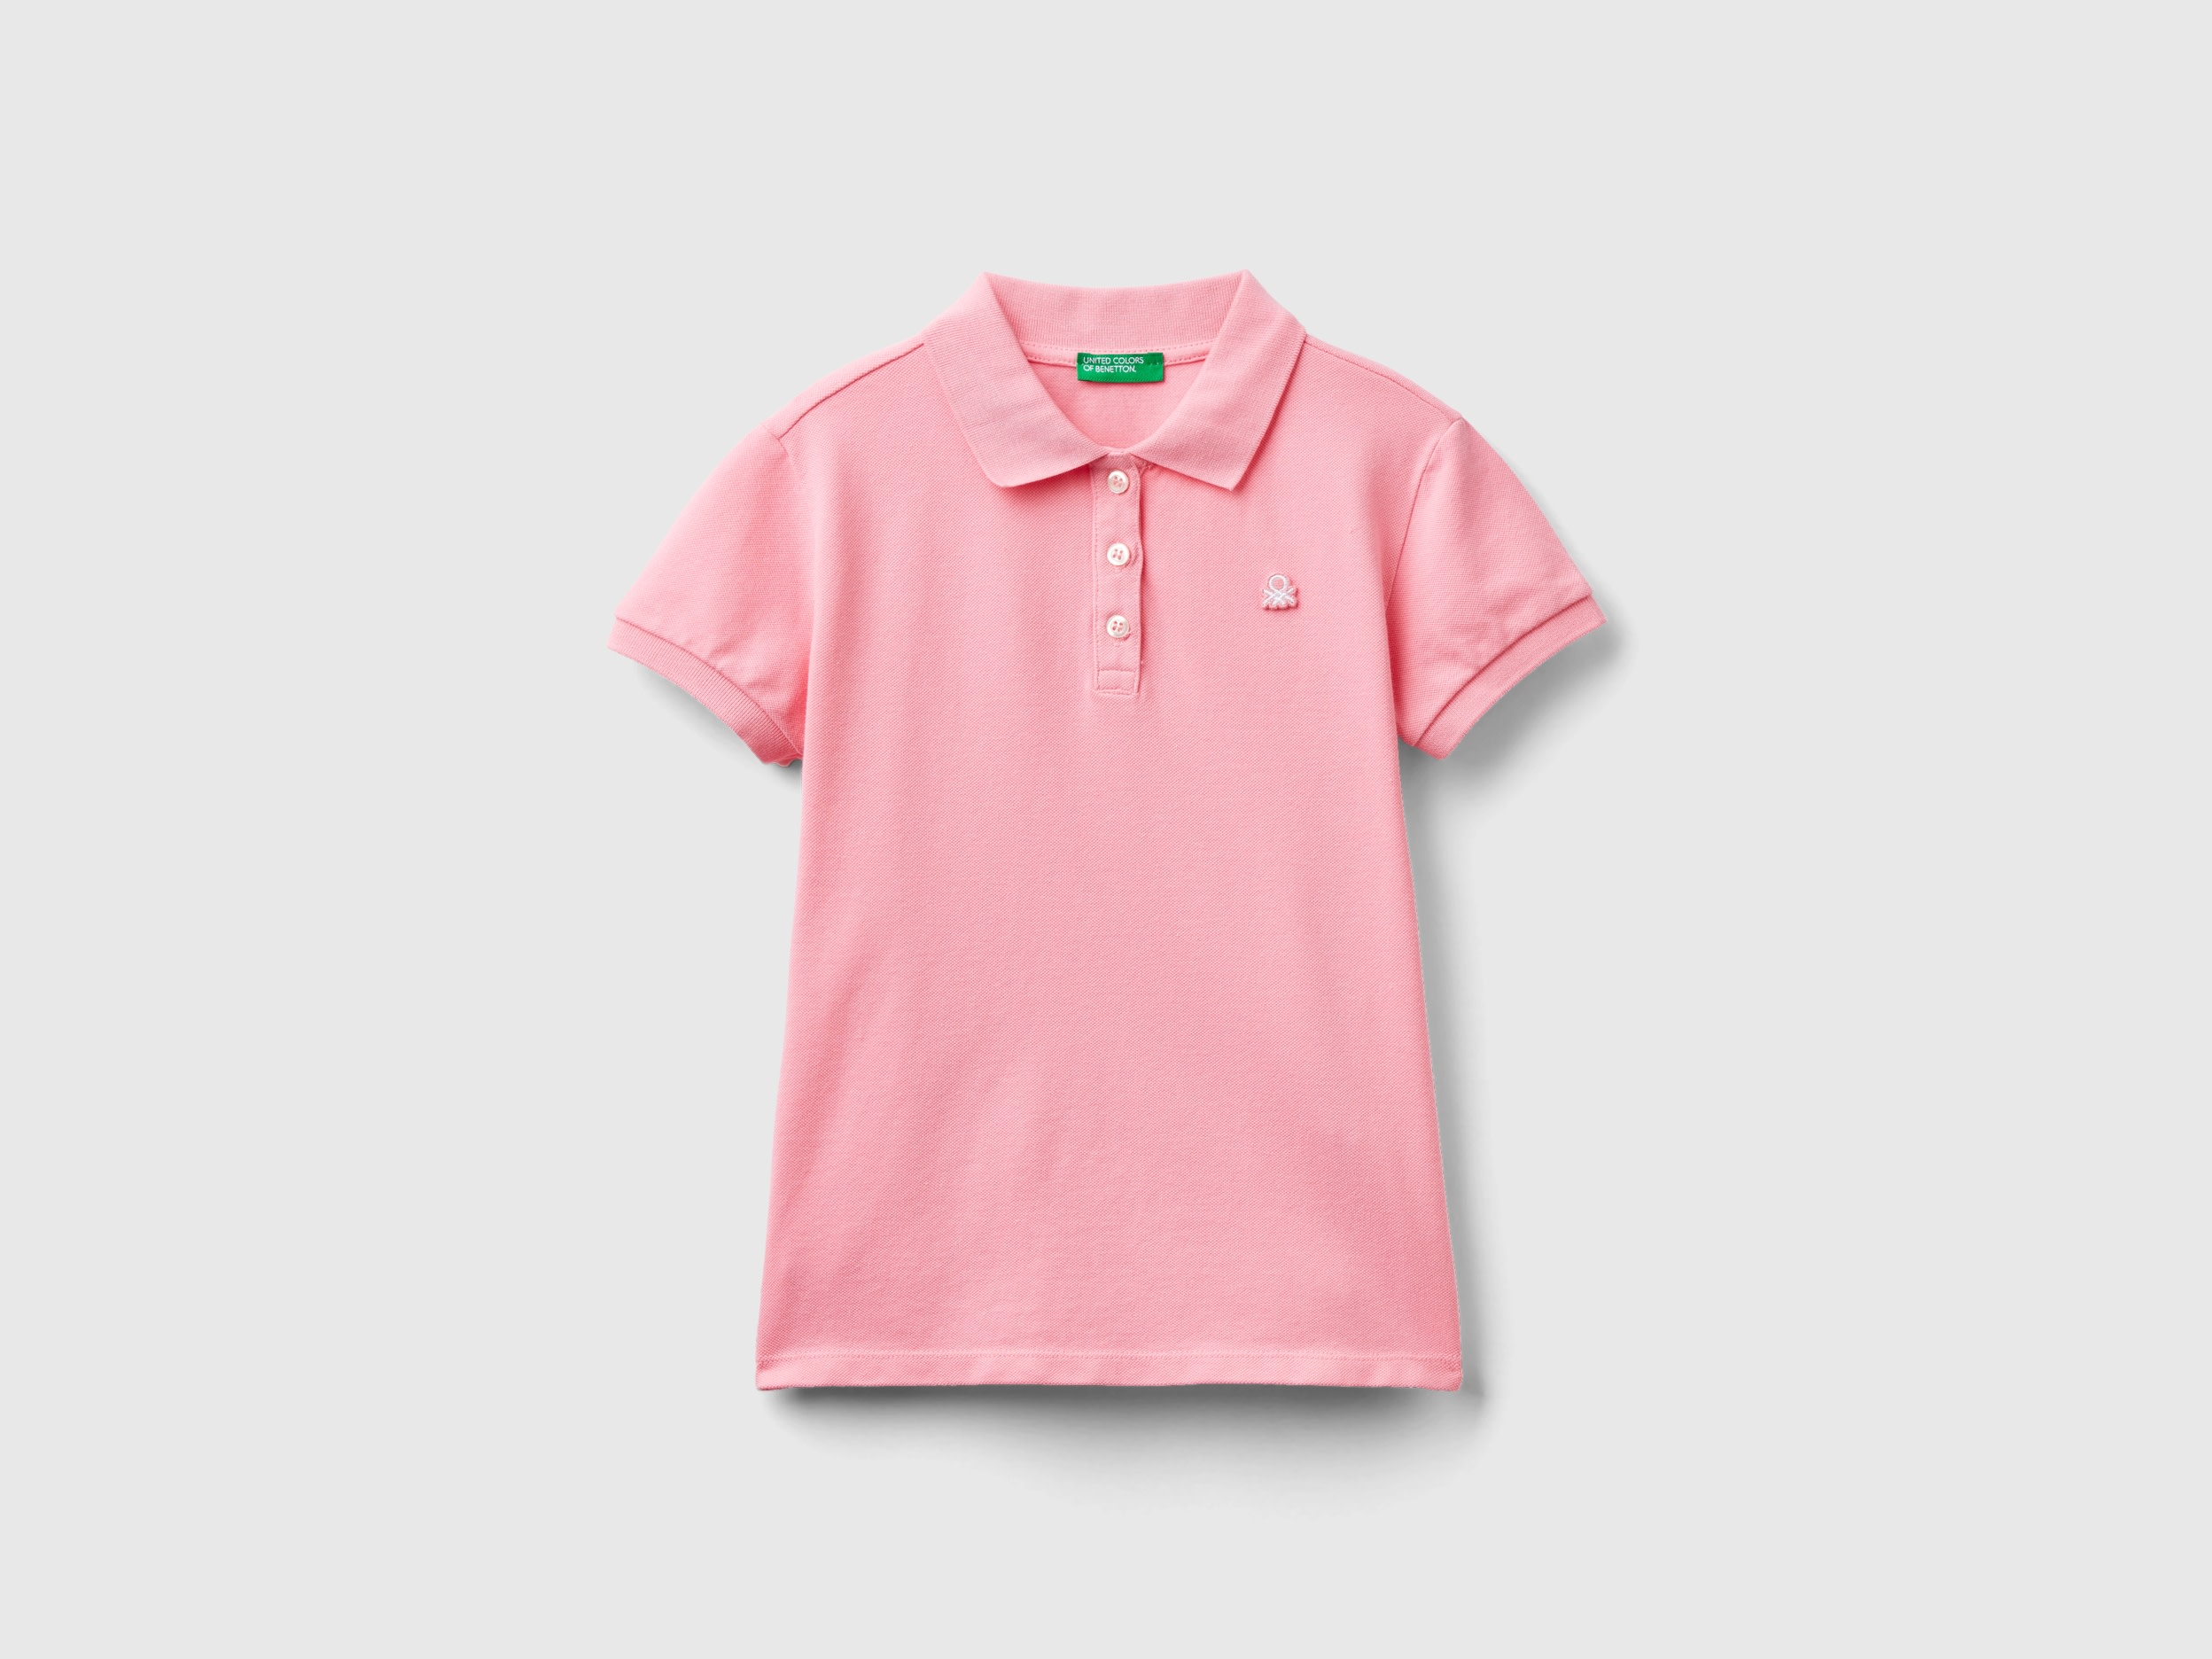 Benetton, Short Sleeve Polo In Organic Cotton, size 2XL, Pink, Kids